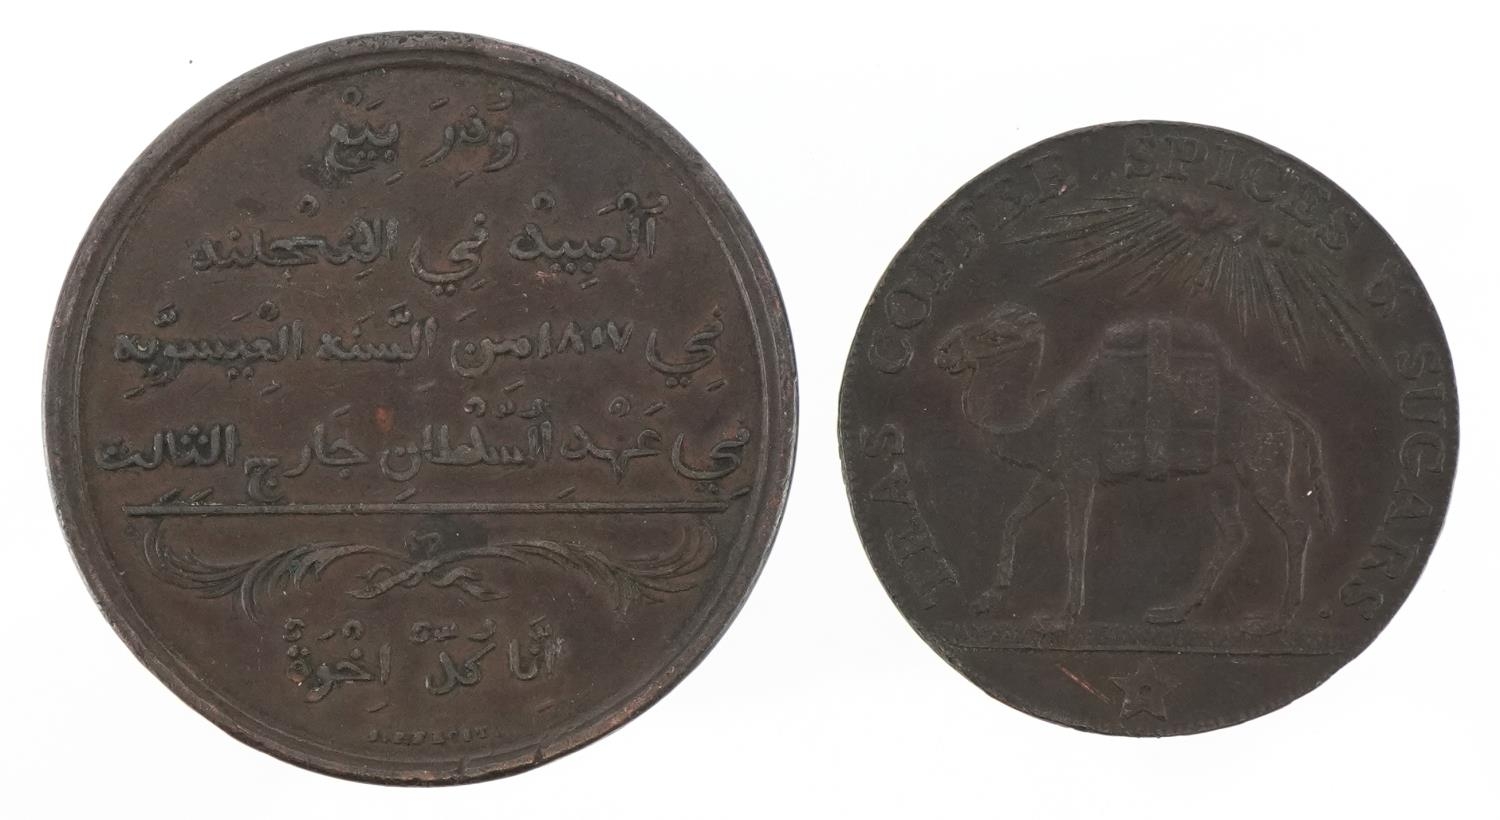 M Lambre & Son, copper trade token for coffee spices and sugars together with a slavery abolition - Image 2 of 2